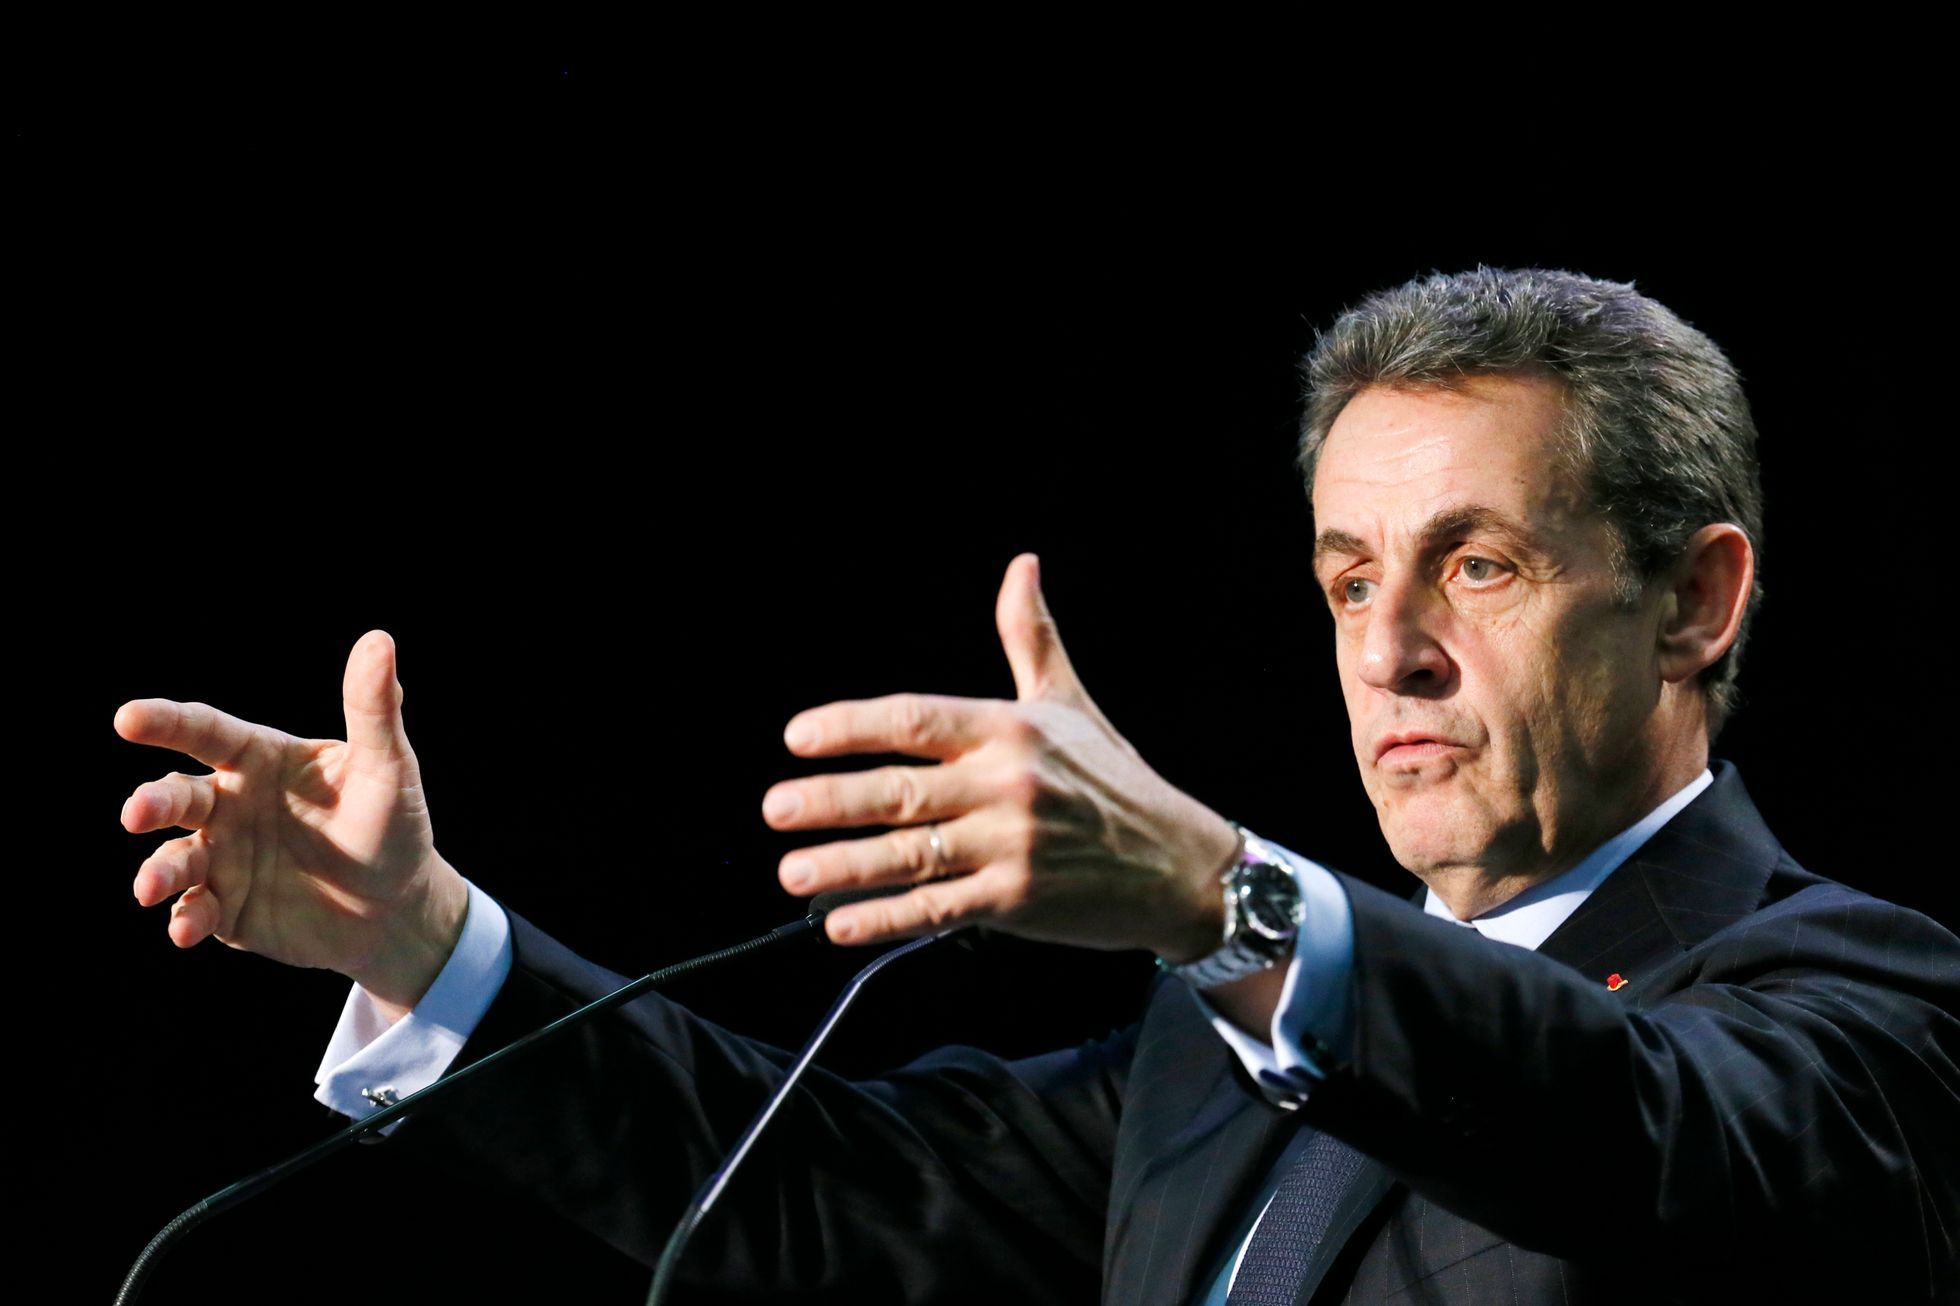 Nicolas Sarkozy, former French president and current UMP conservative political party head, attends a political rally as he campaigns for French departmental elections in Palaiseau